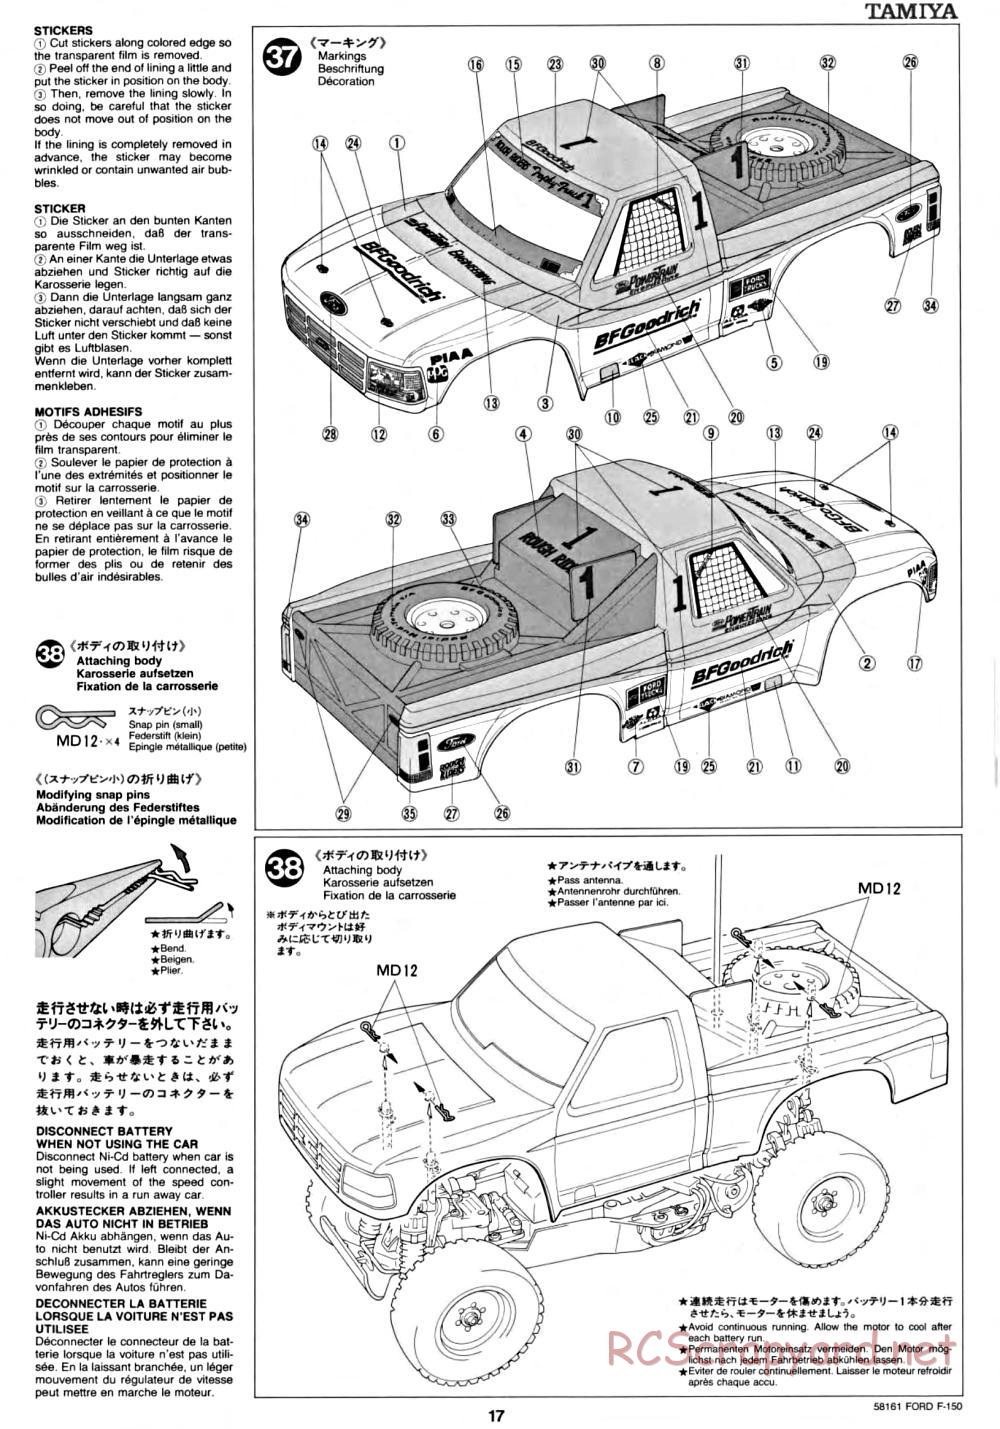 Tamiya - Ford F-150 Truck Chassis - Manual - Page 17